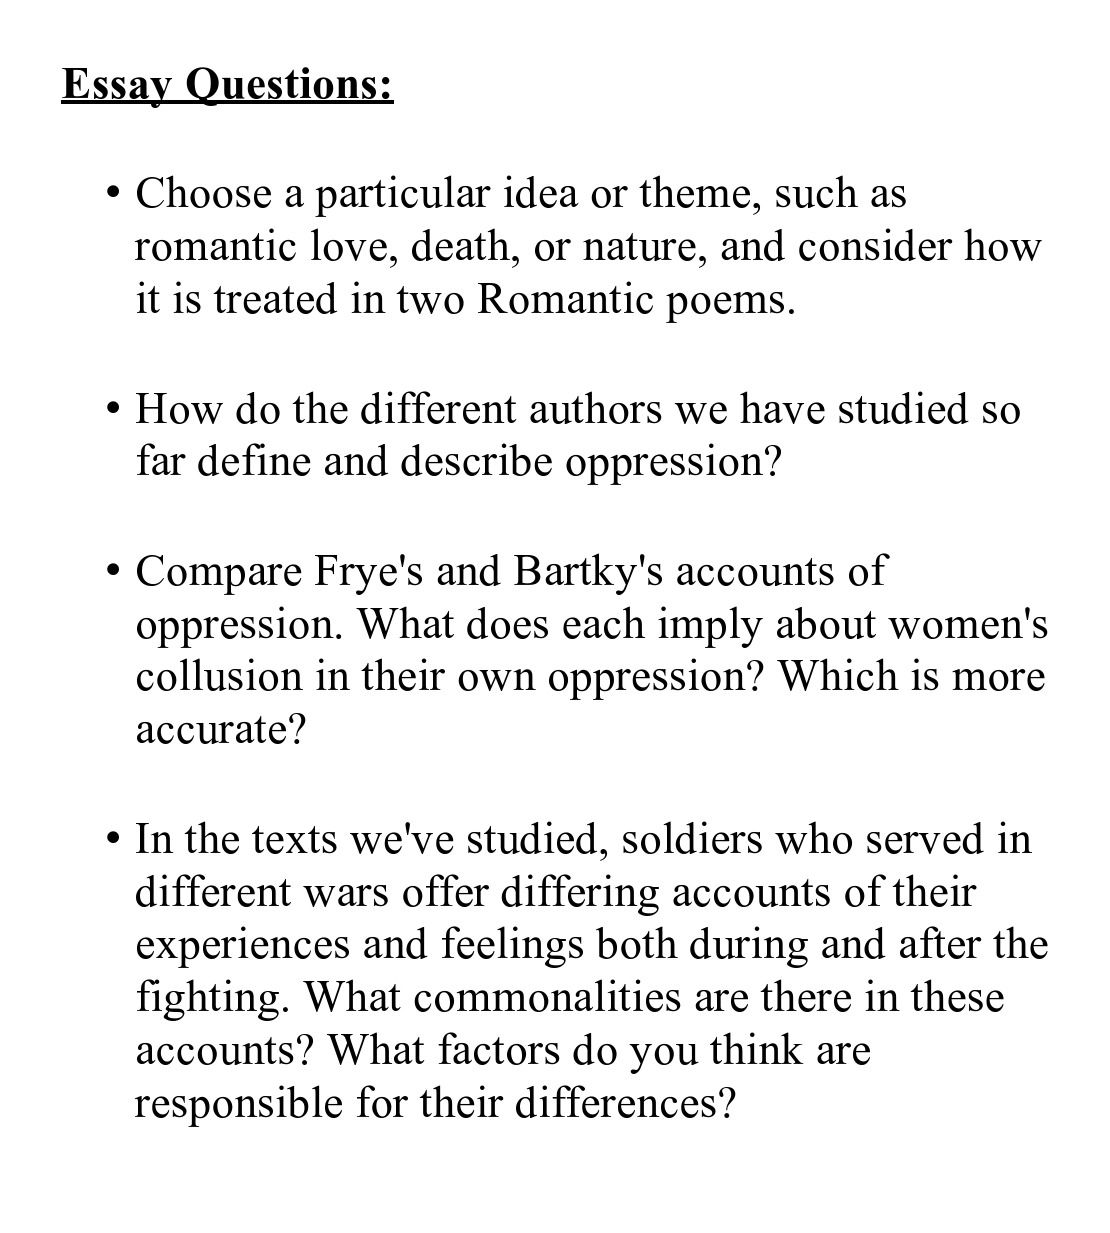 How to answer essay questions